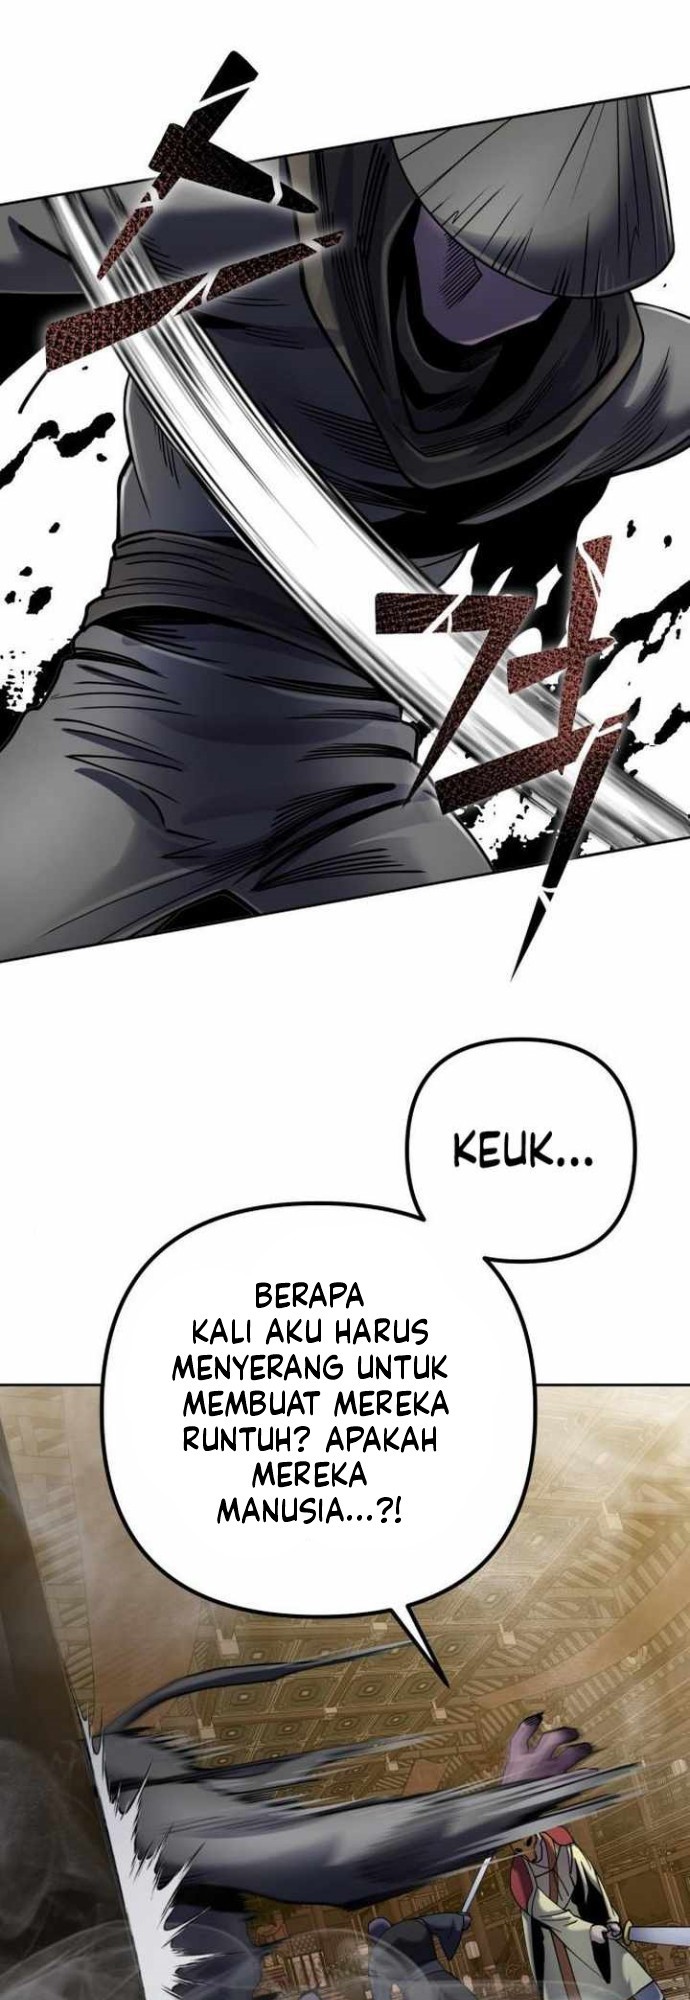 Revenge Of Young Master Peng Chapter 23